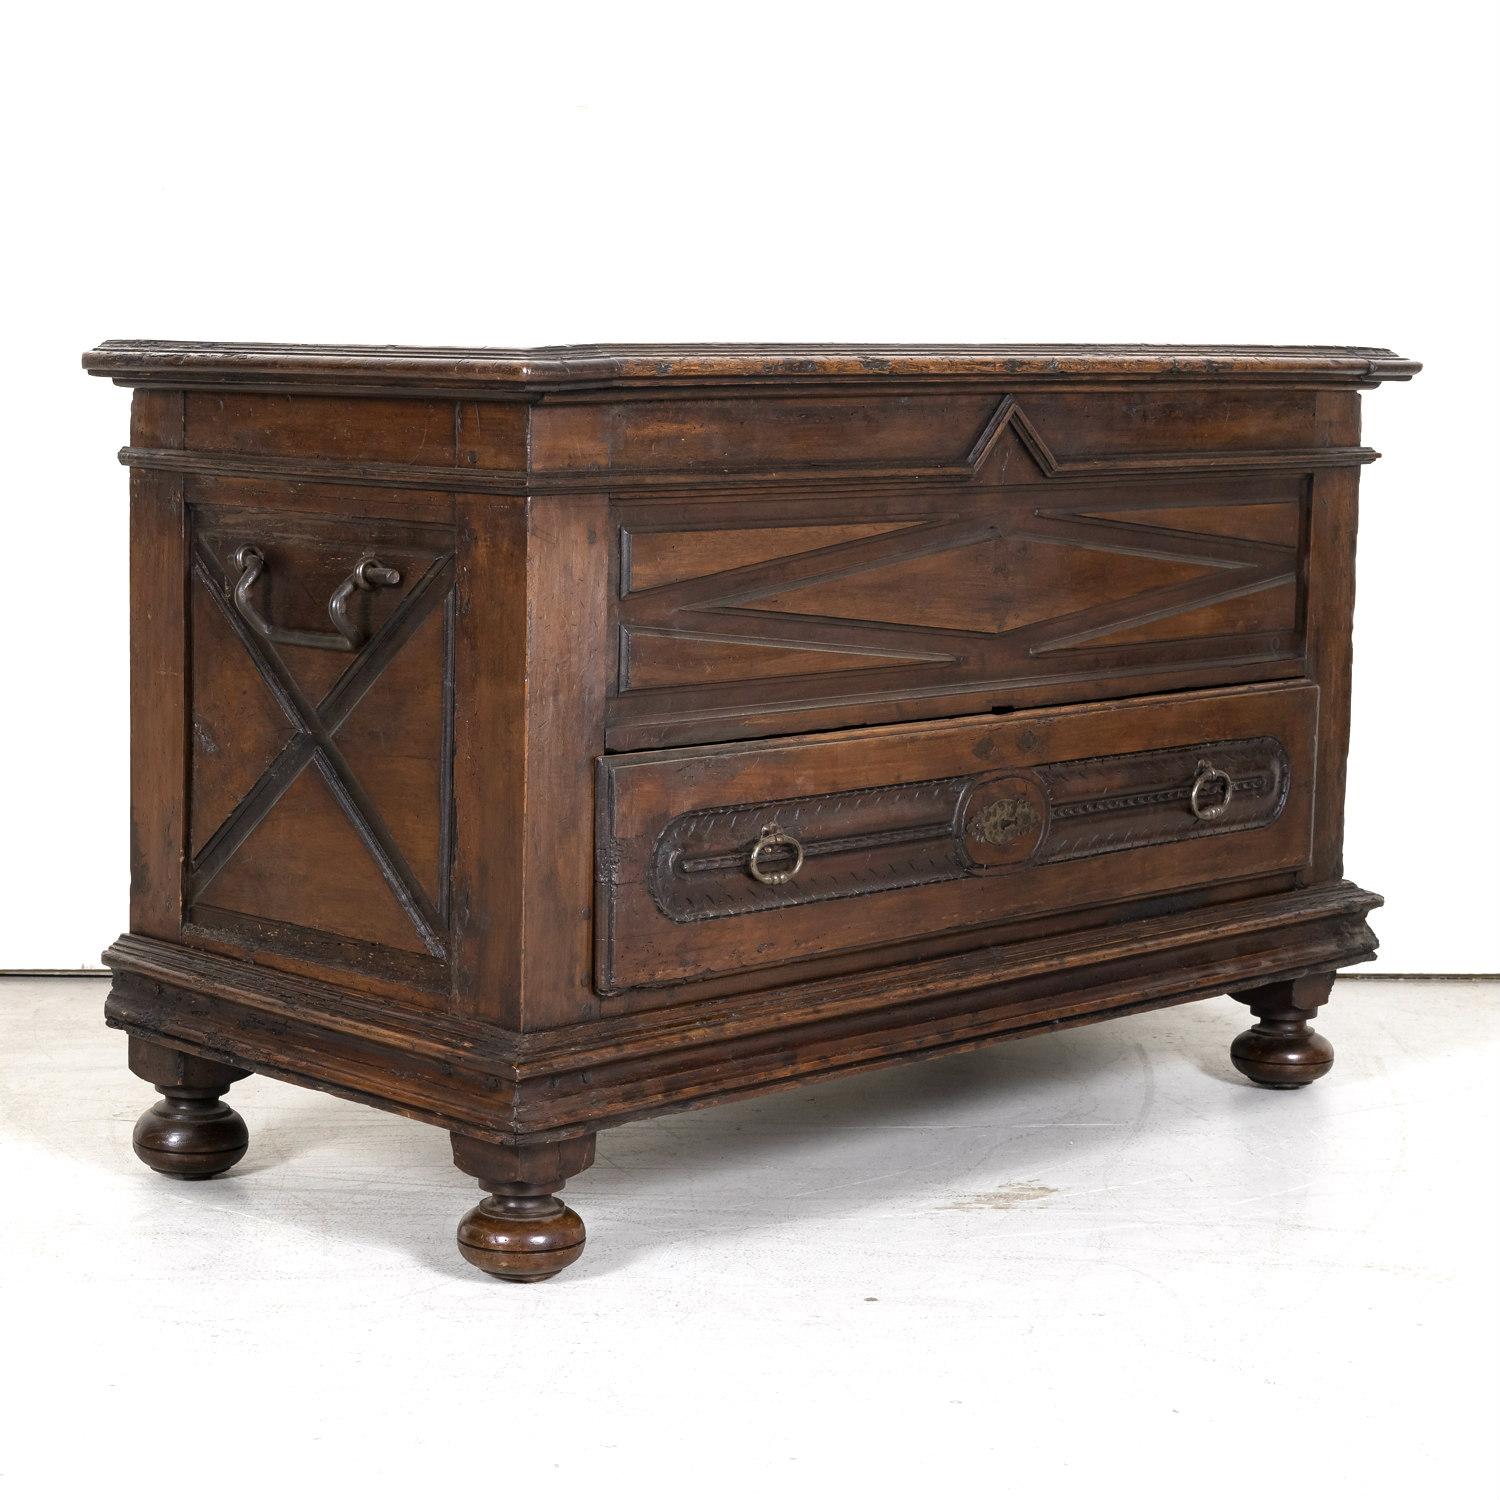 An early 18th century Louis XIII style coffer or trunk handcrafted of solid old growth French walnut having a beautiful rich and dark color patina, circa 1710. This handsome trunk features typical Renaissance style geometric carvings like the raised